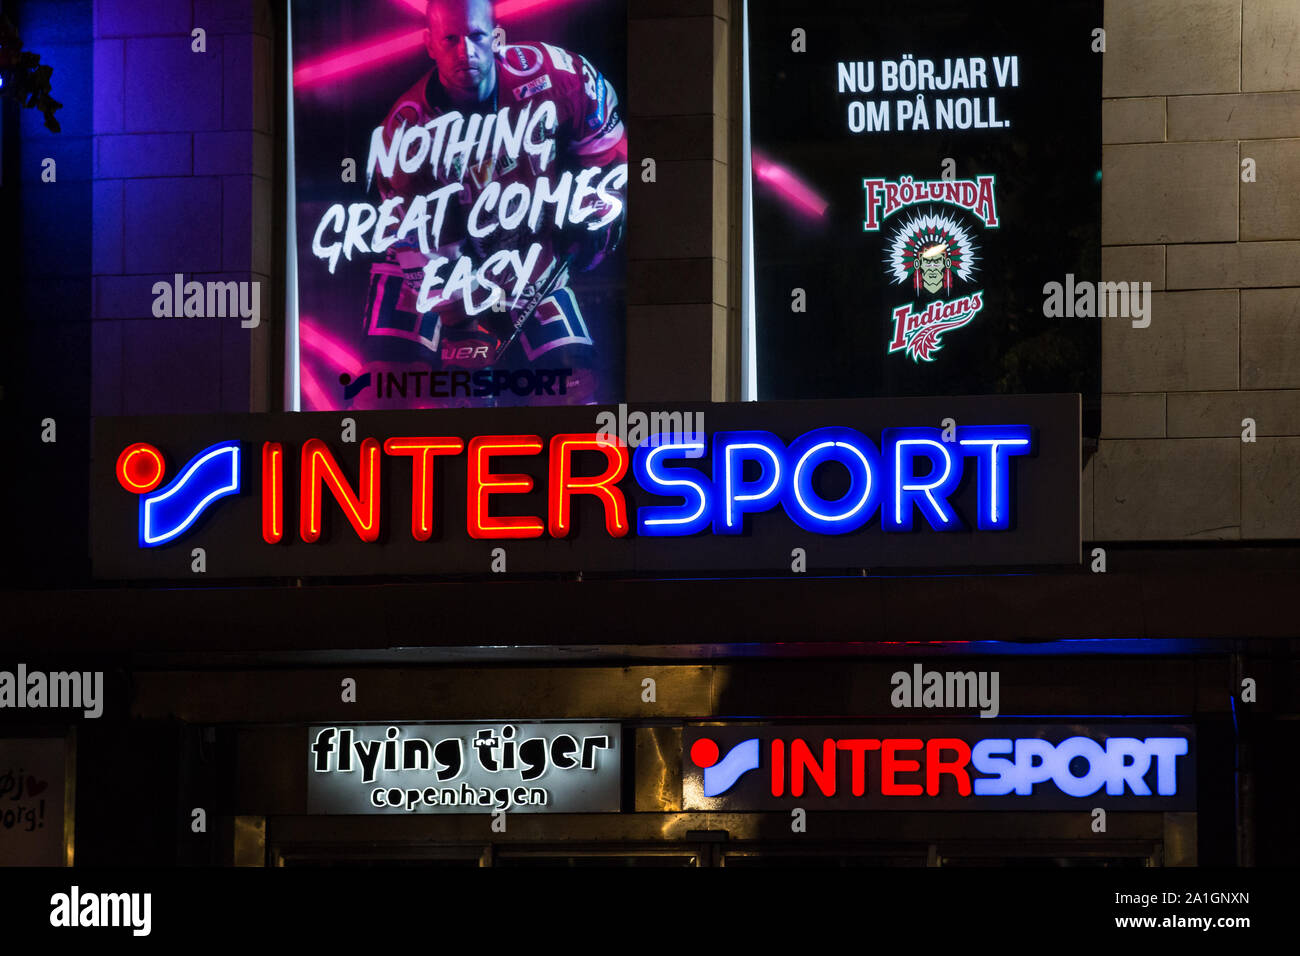 Intersport Logo High Resolution Stock Photography and Images - Alamy